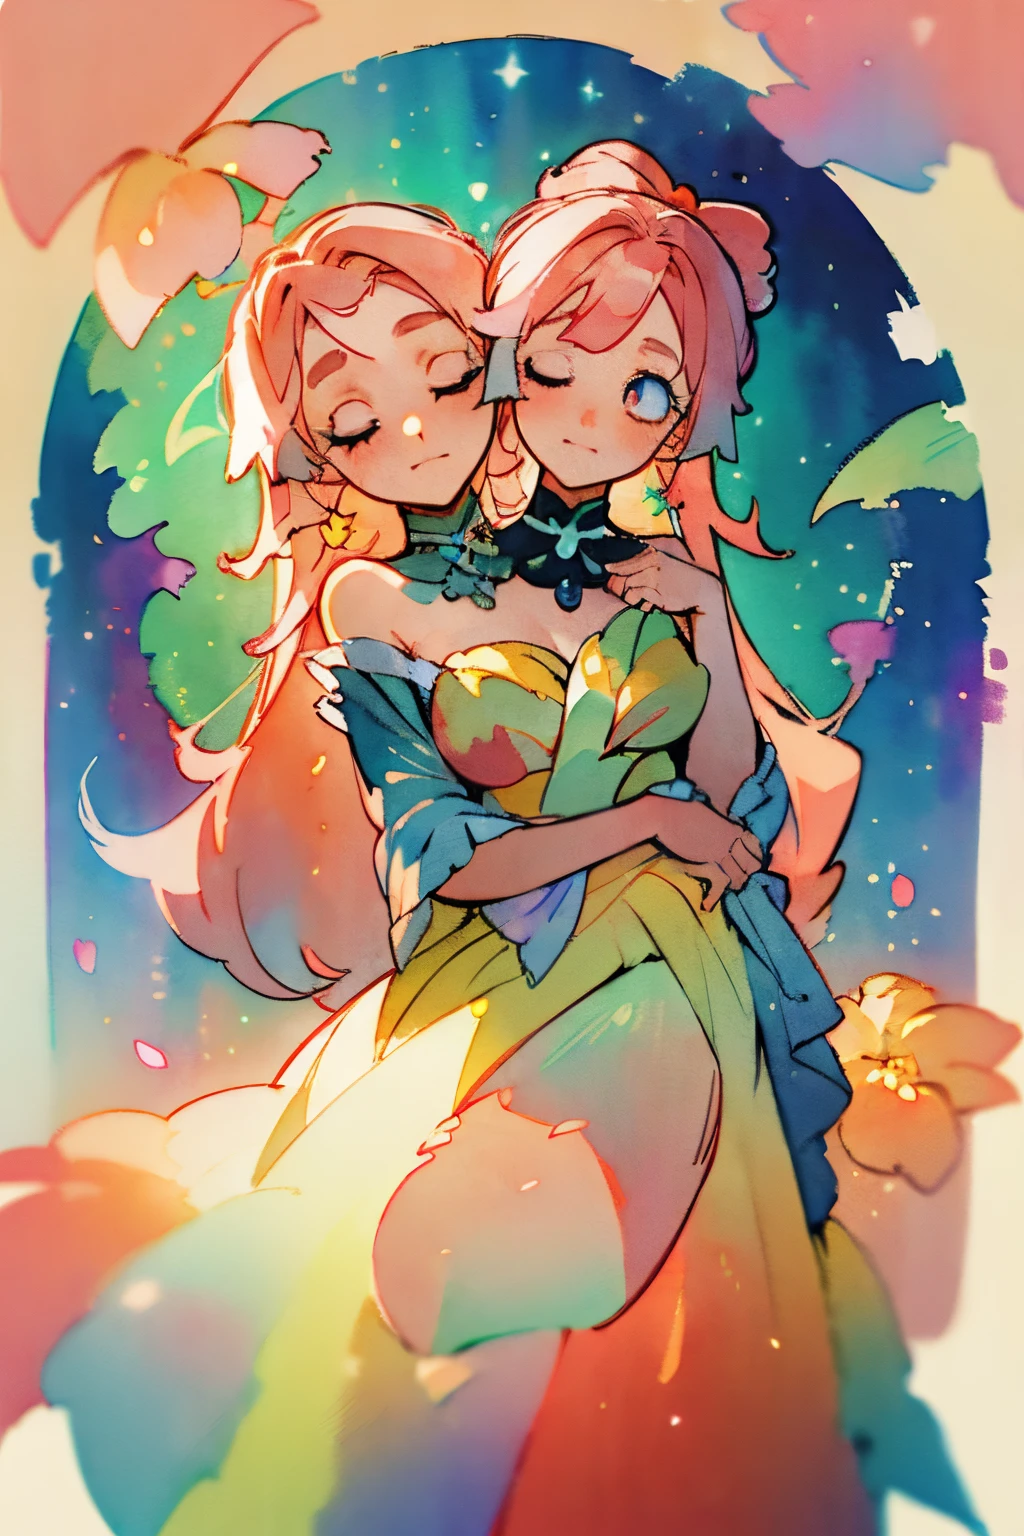 (masterpiece, best quality), best resolution, (2heads:1.5), 1girl, beautiful two-headed woman in ombre gradient dress, kokomi character, long golden pink hair, colorful watercolor background, watercolor illustration, anime art style, glowing aura around her, glowing lights! digital painting, flowing glowing hair, glowing flowing hair, beautiful digital illustration, fantasia otherworldly landscape plants flowers, beautiful, masterpiece, best quality, anime style